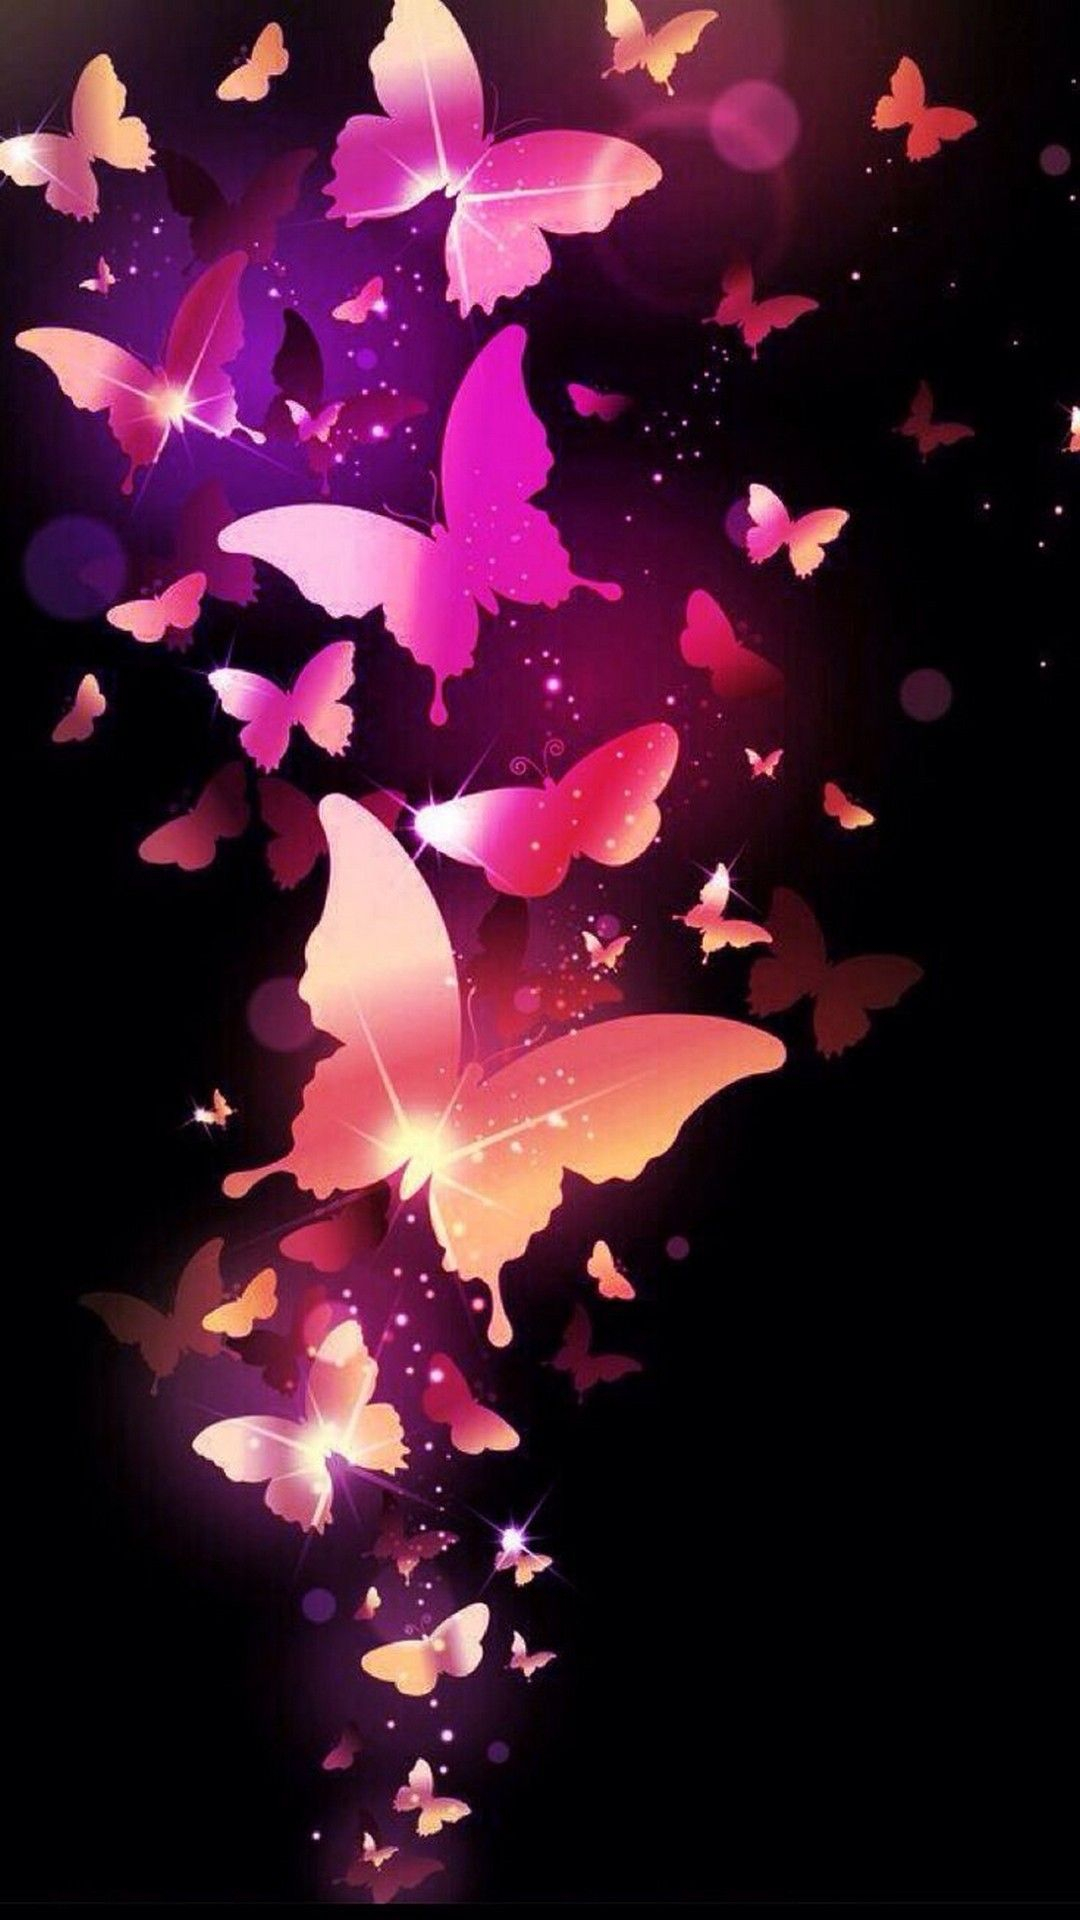 1080x1920 Wallpapers Phone Pink Butterfly 2019 Android Wallpapers | Butterfly wallpaper, Neon wallpaper, Butterfly wallpaper backgrounds